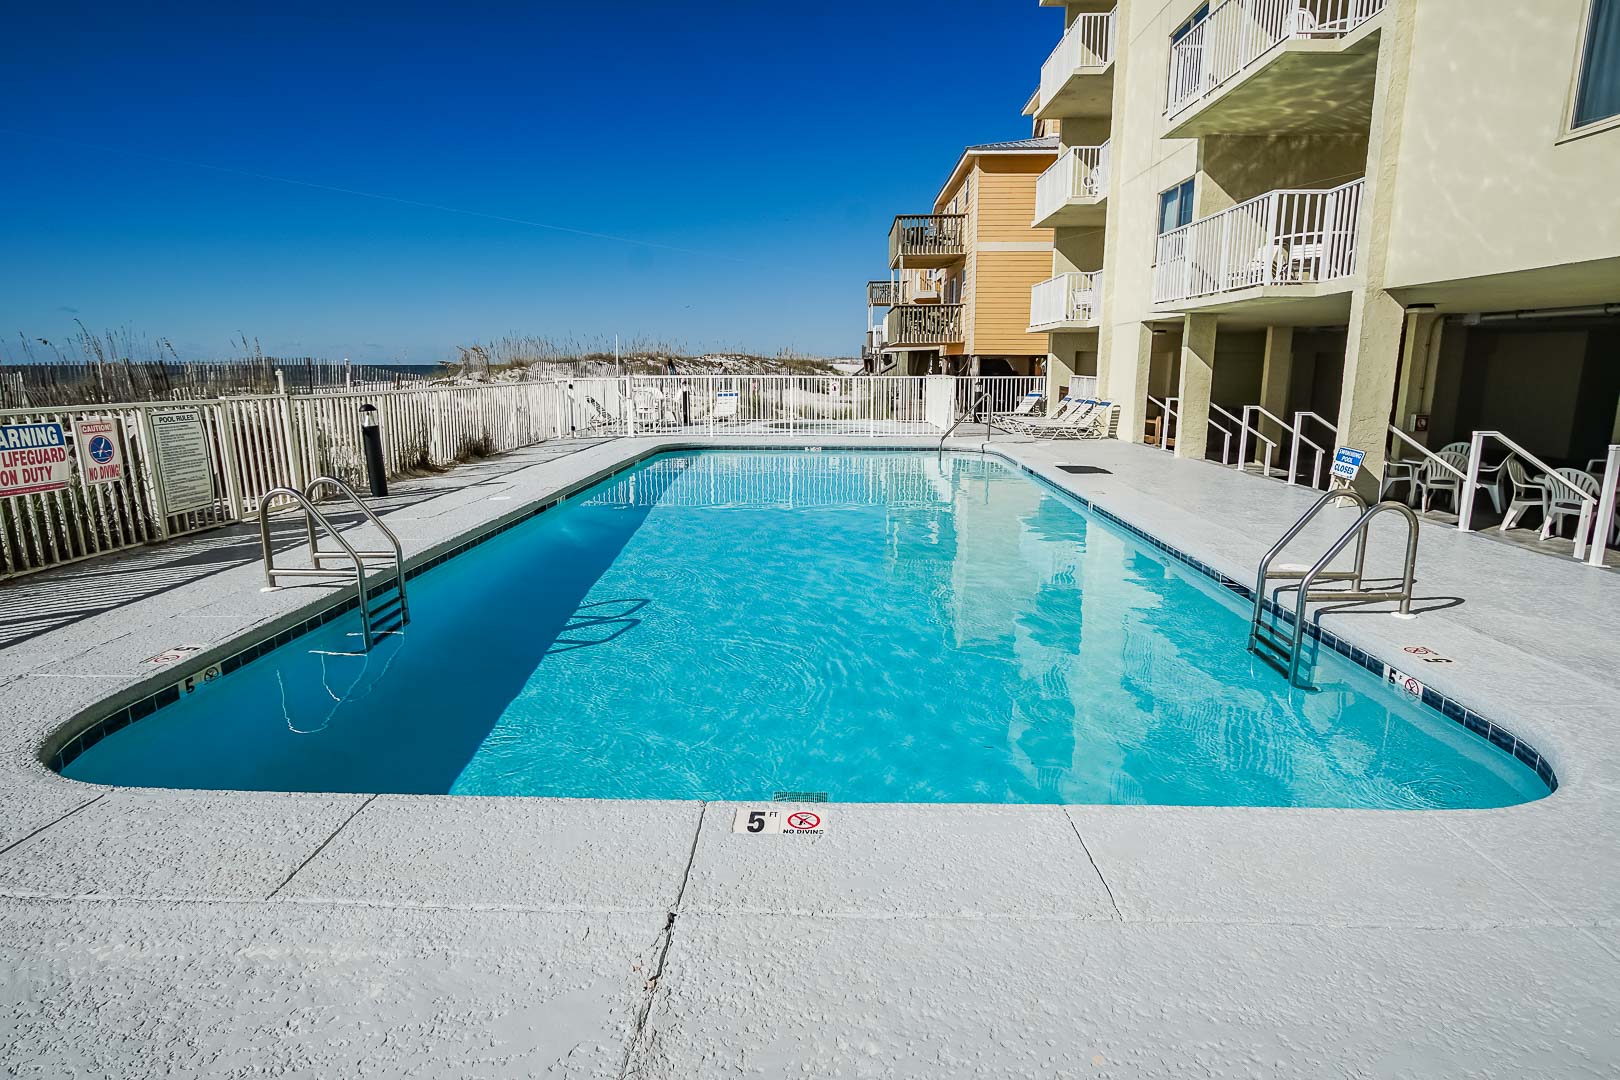 An expansive swimming pool at VRI's Shoreline Towers in Gulf Shores, Alabama.